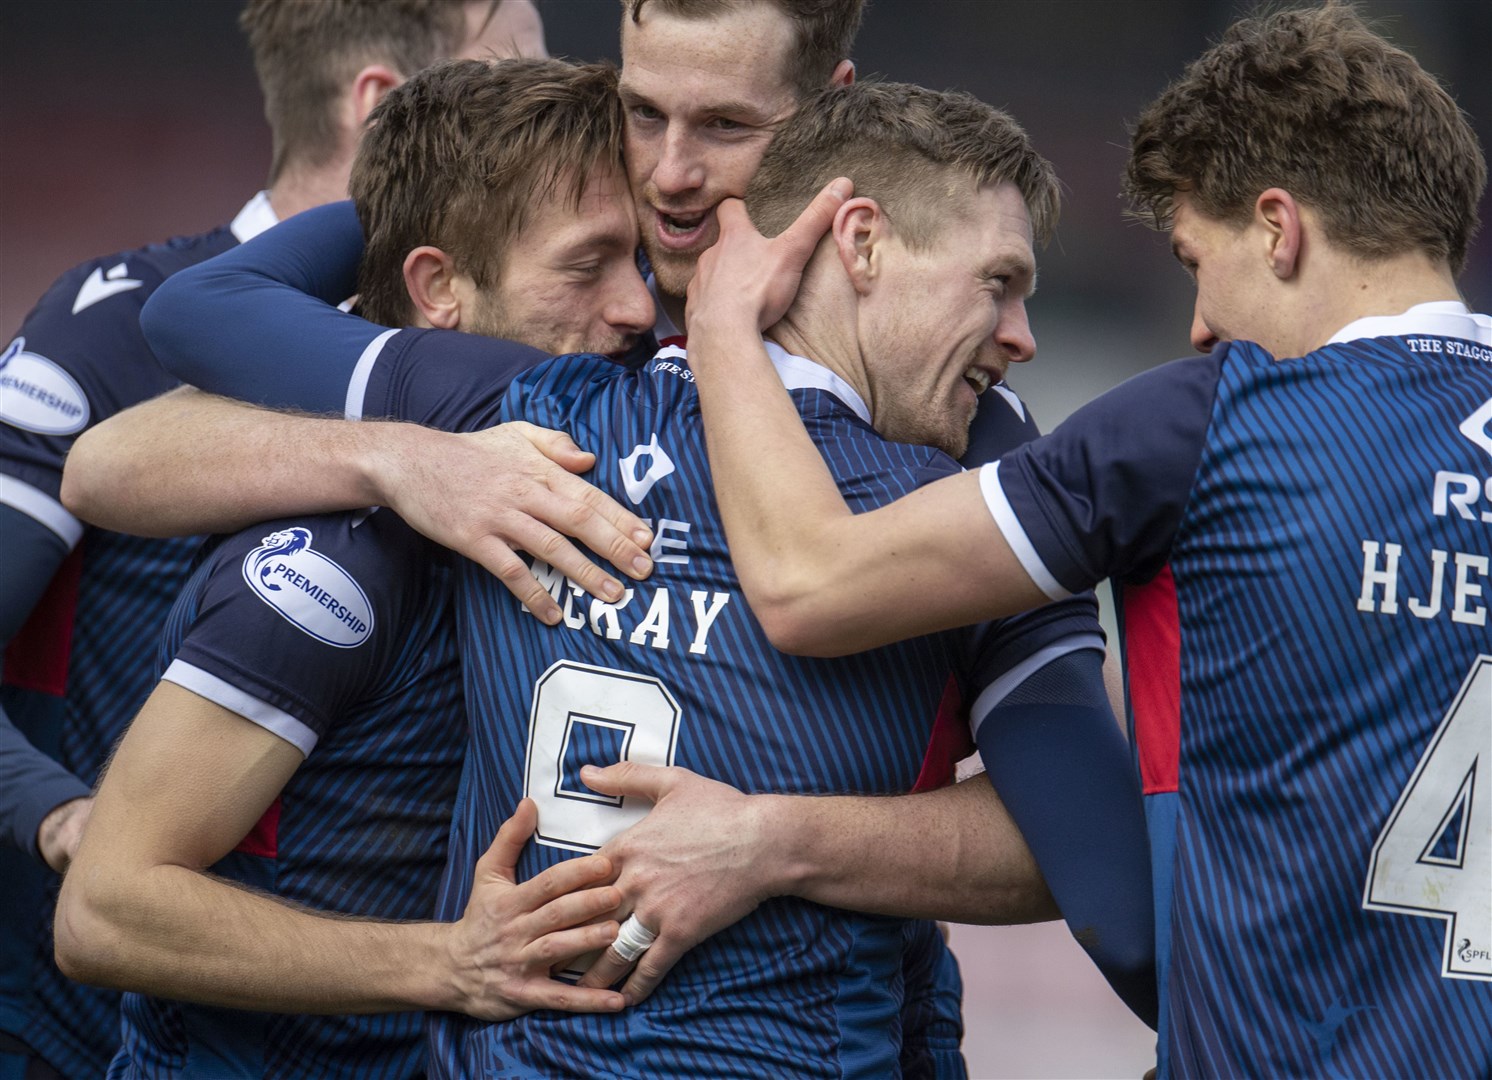 Picture - Ken Macpherson, Inverness. Ross County(3) v Kilmarnock(2). 06.03.21. Ross County's Billy McKay celebrates after scoring to go 3-1 ahead.